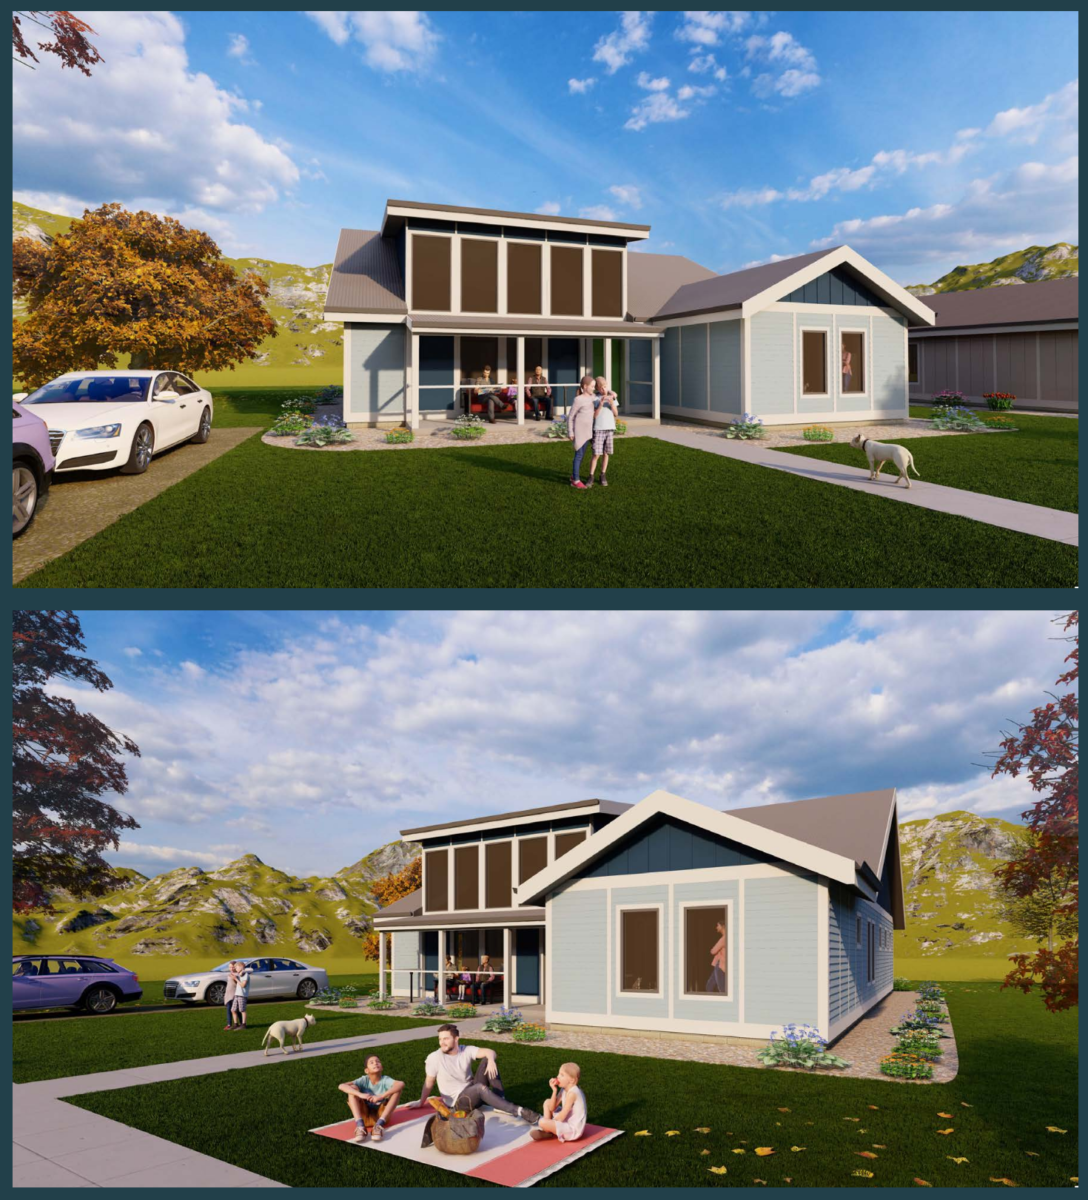 A 3D rendering of what the author's design would look like in real life for Lot 1.